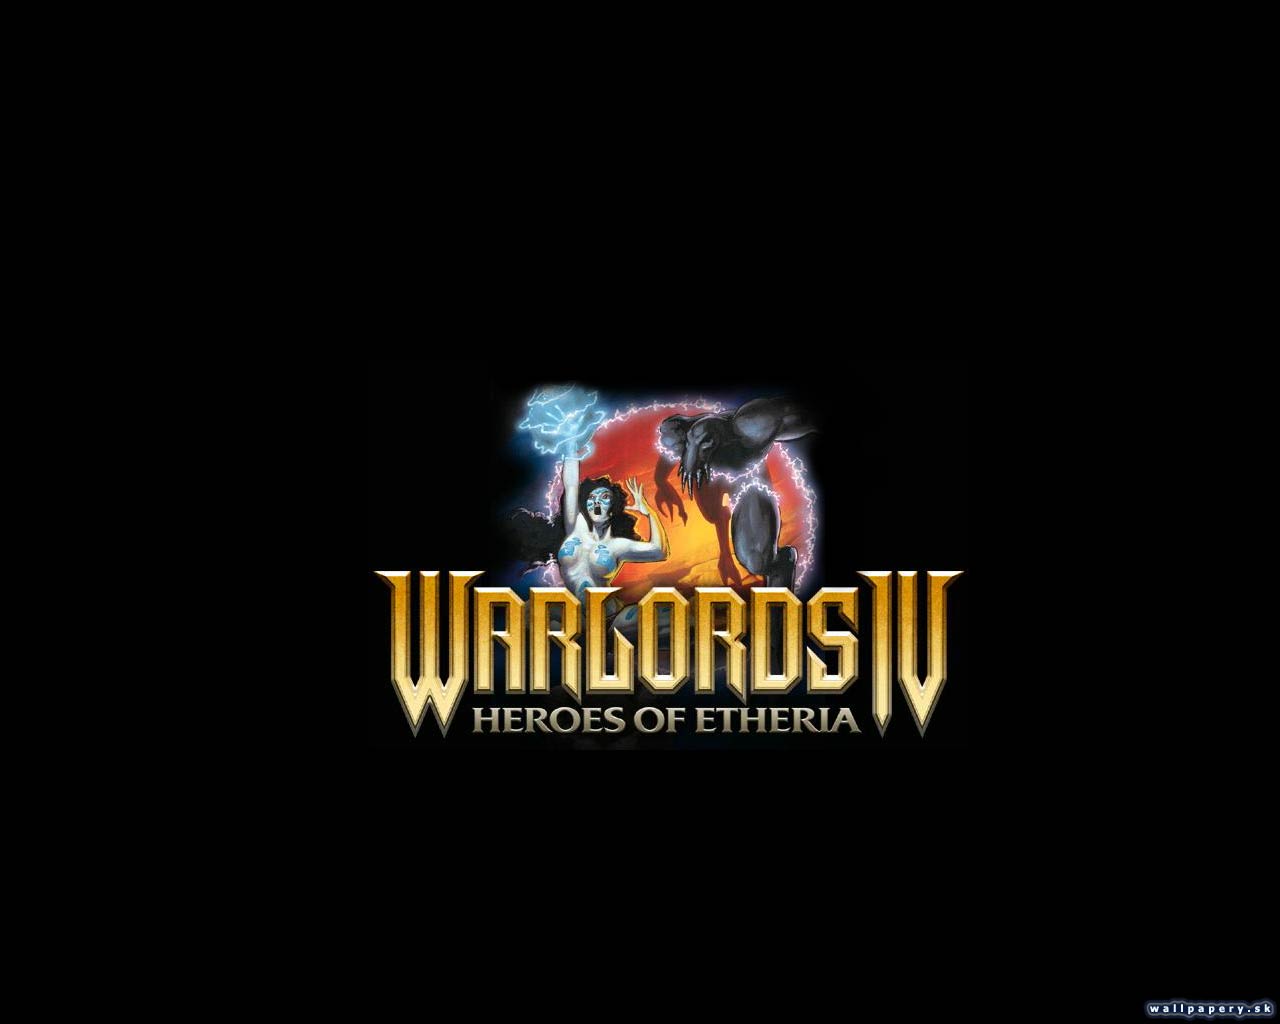 Warlords 4: Heroes of Etheria - wallpaper 13